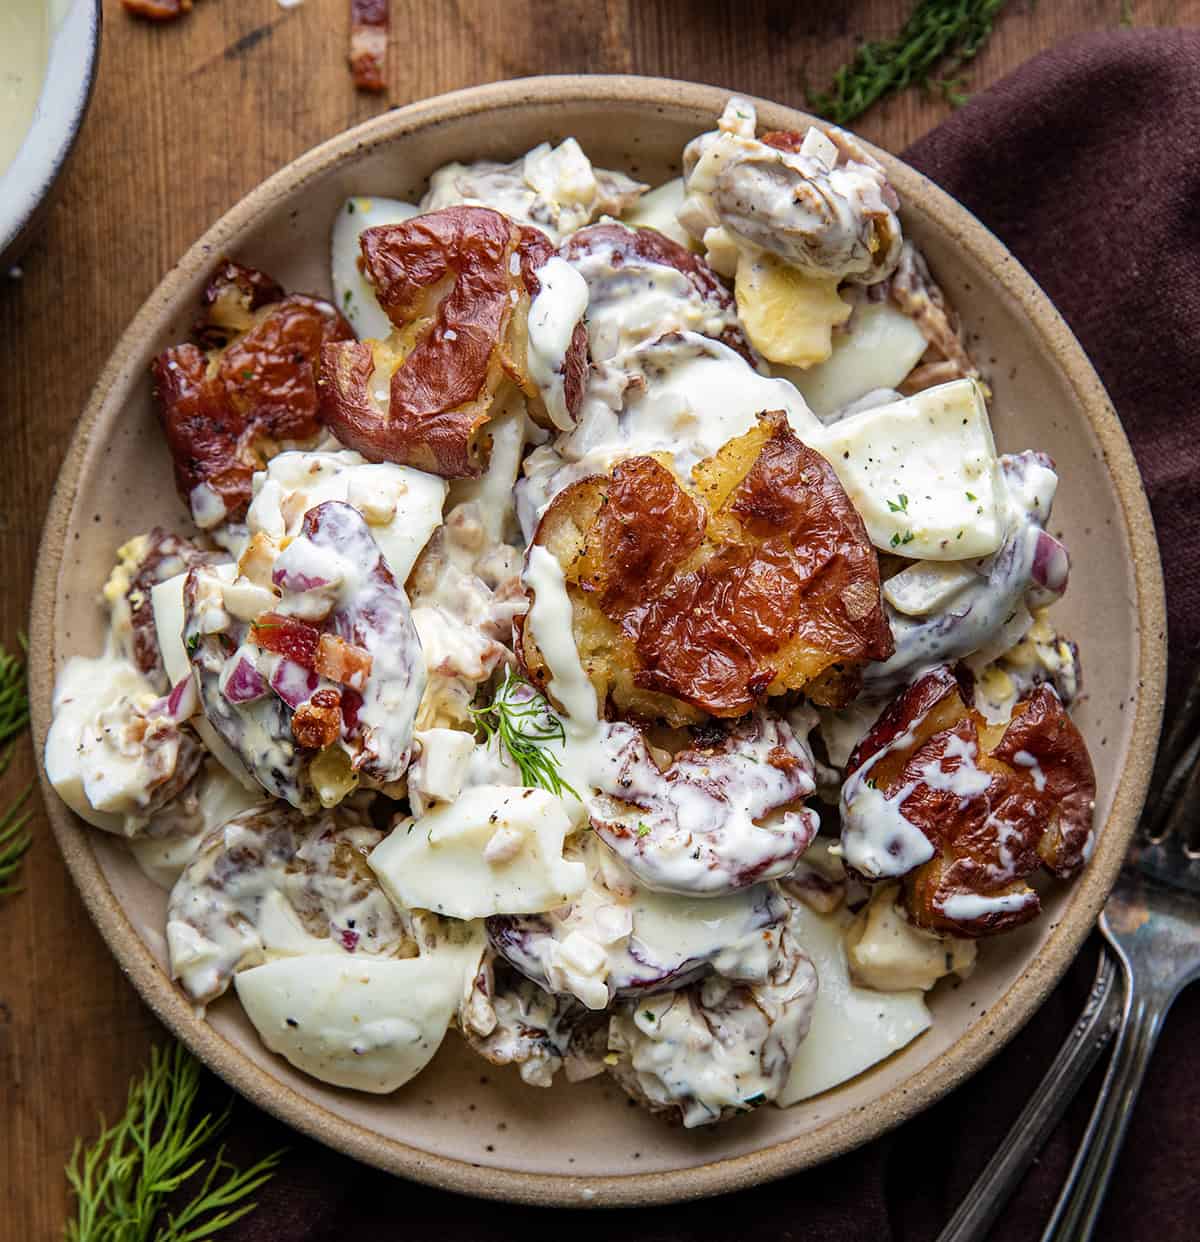 Plate of Smashed Roasted Potato Salad on a wooden table showing the smashed potatoes, hard boiled eggs, crispy bacon bits, finely diced onion, and perfect dressing that brings it all together.